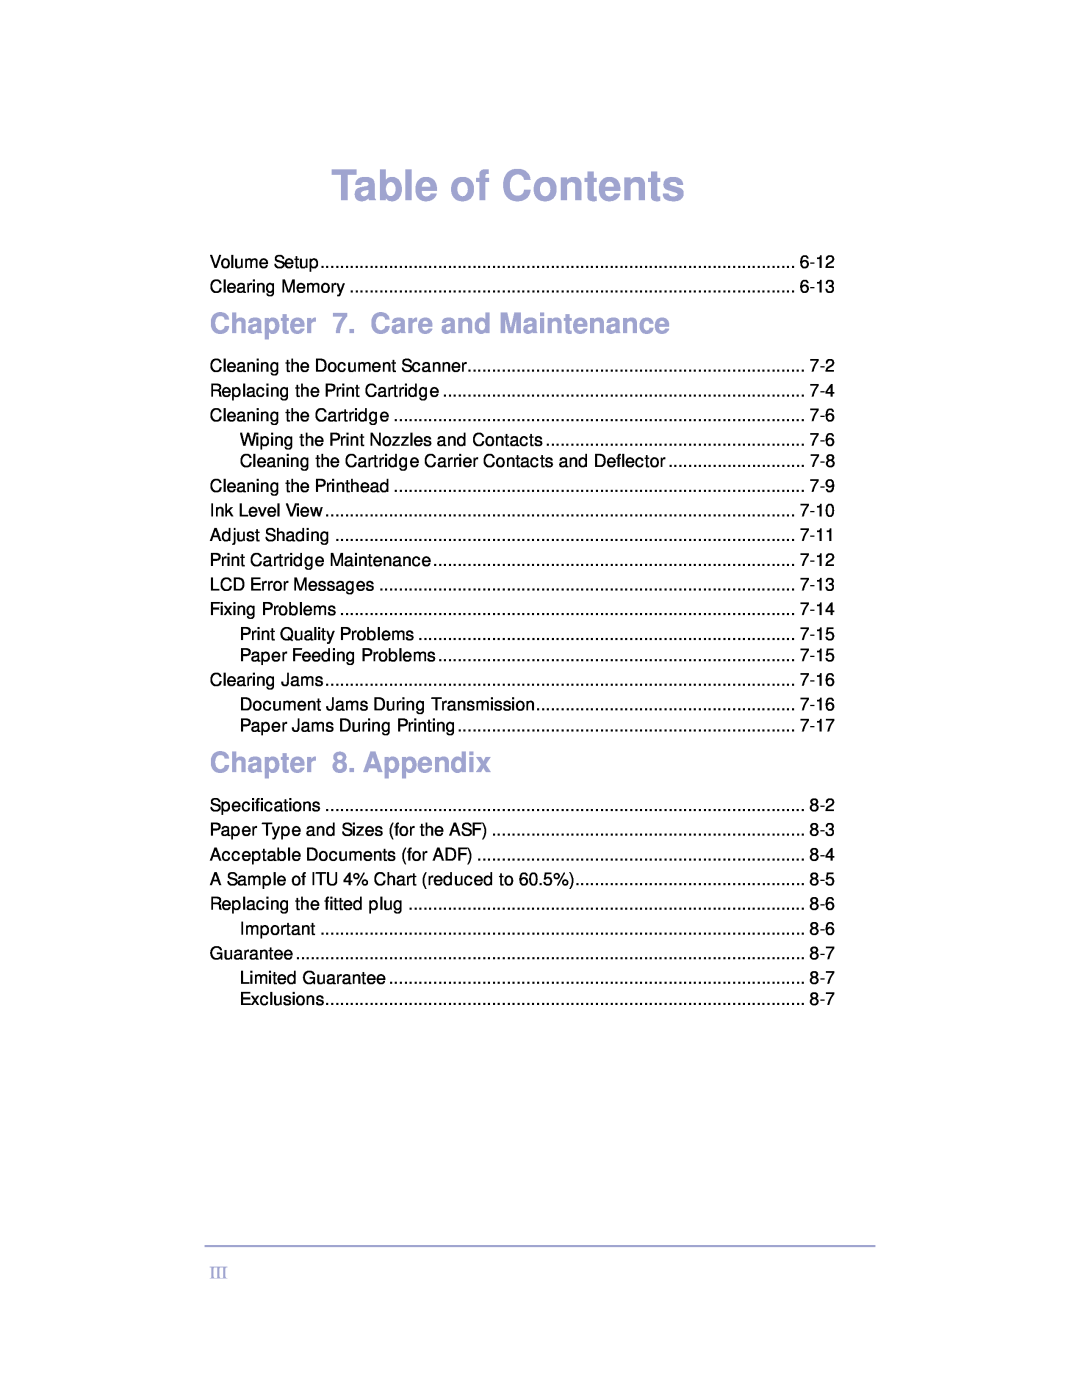 Samsung SF-3100 manual Care and Maintenance, Appendix, Table of Contents 